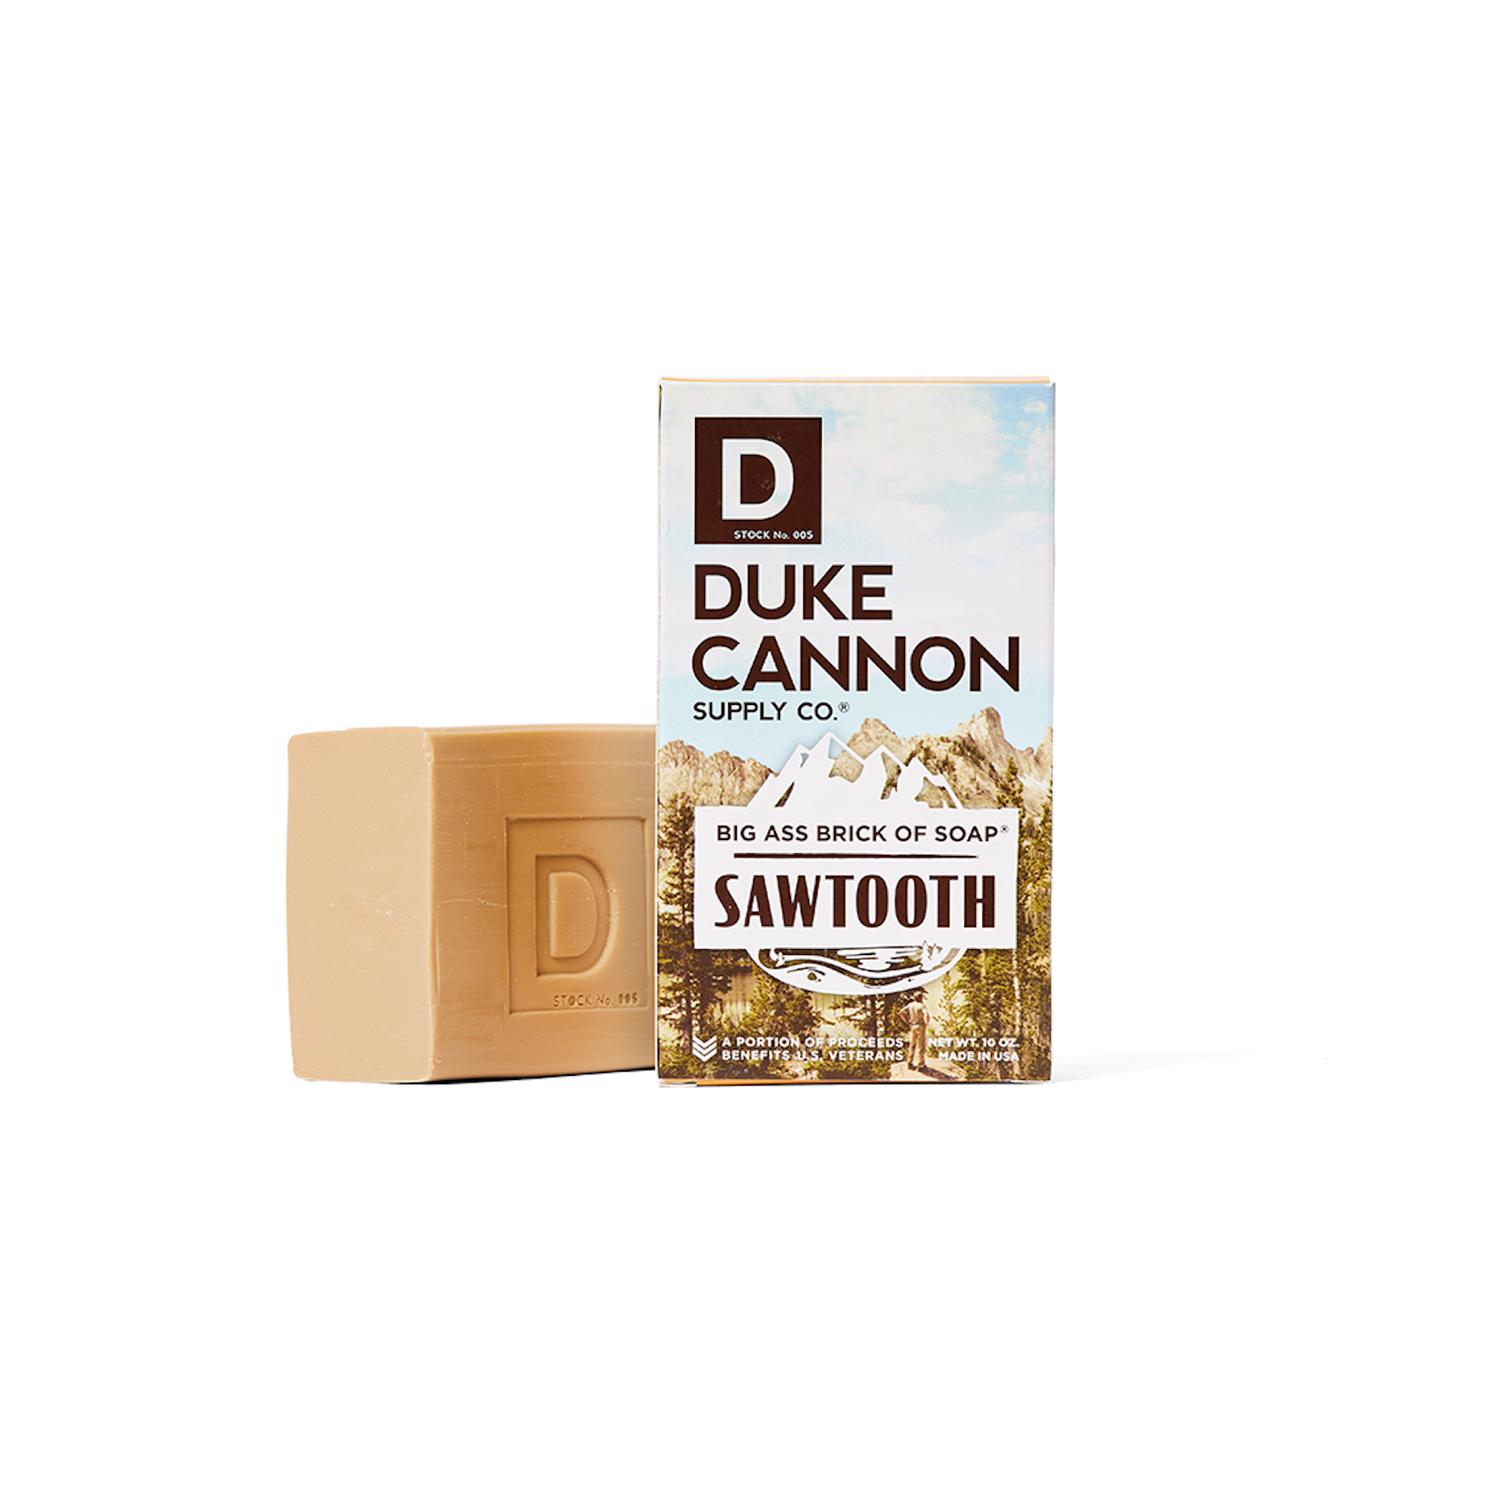 Photos - Hair Styling Product Duke Cannon Big Ass Brick Of Soap Shower Soap 10 oz 1 pk 1000165 